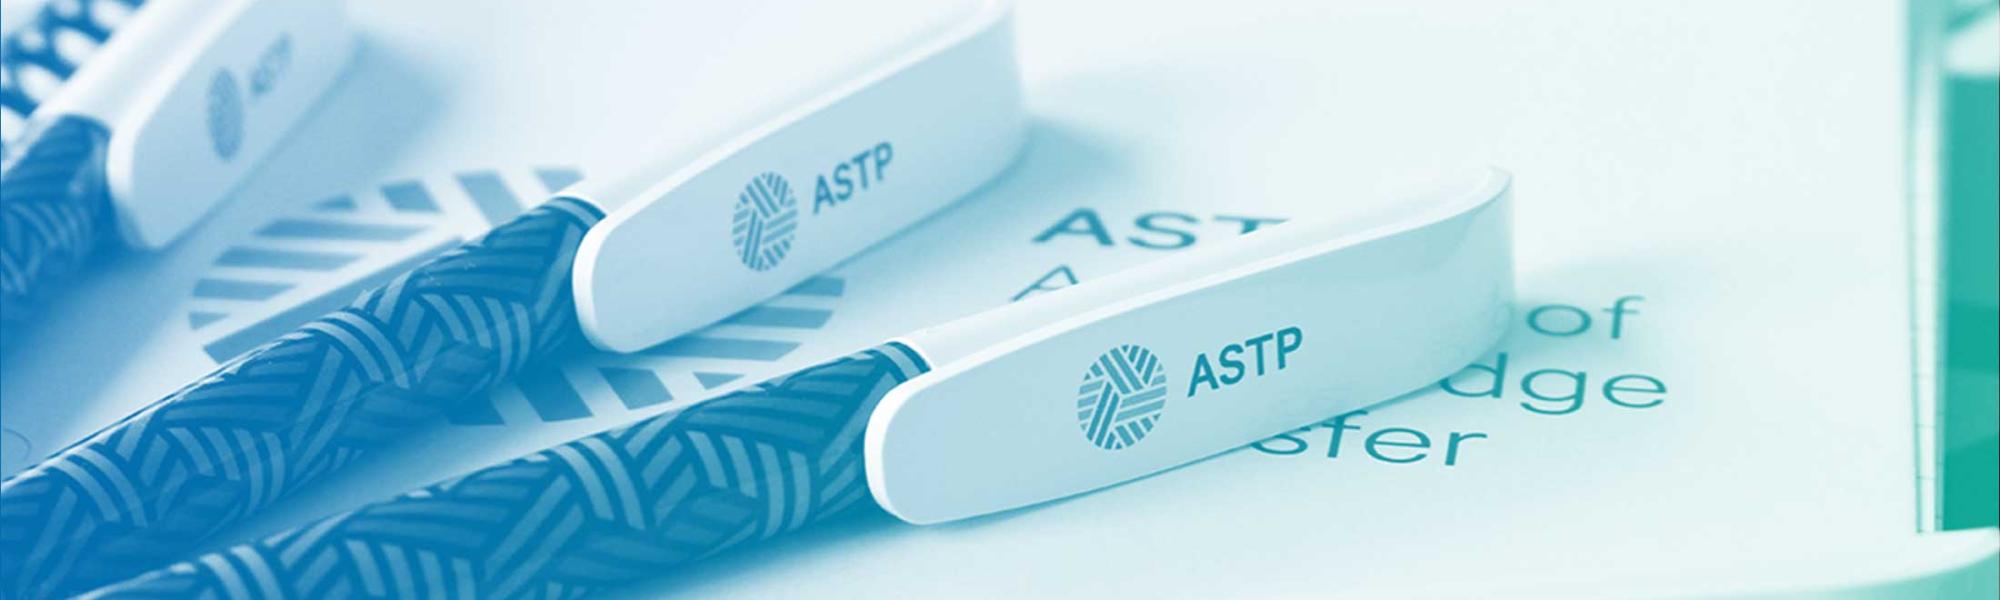 ASTP - About